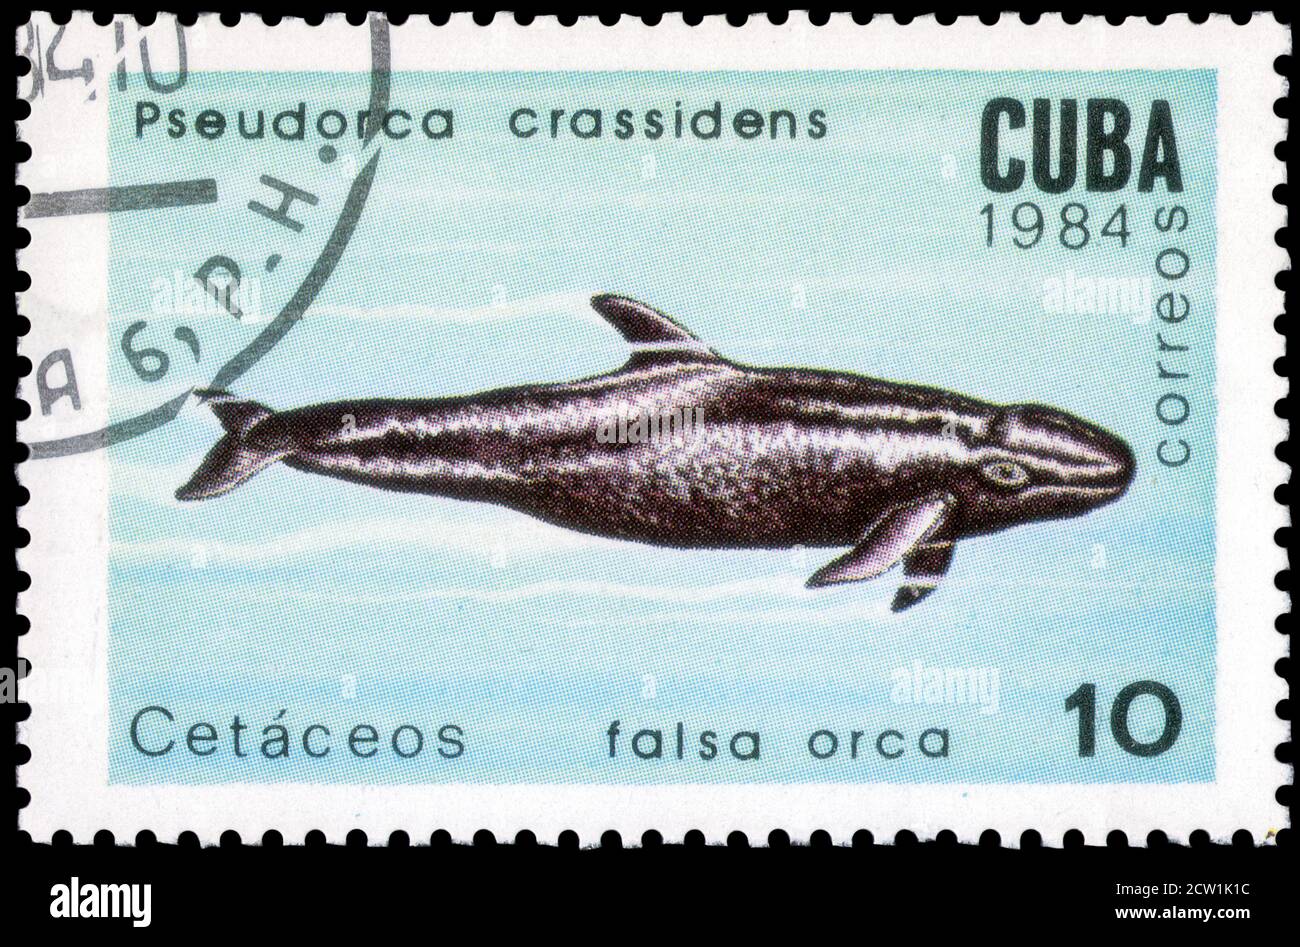 Saint Petersburg, Russia - September 18, 2020: Stamp printed in the Cuba the image of the False Killer Whale, Pseudorca crassidens, circa 1984 Stock Photo